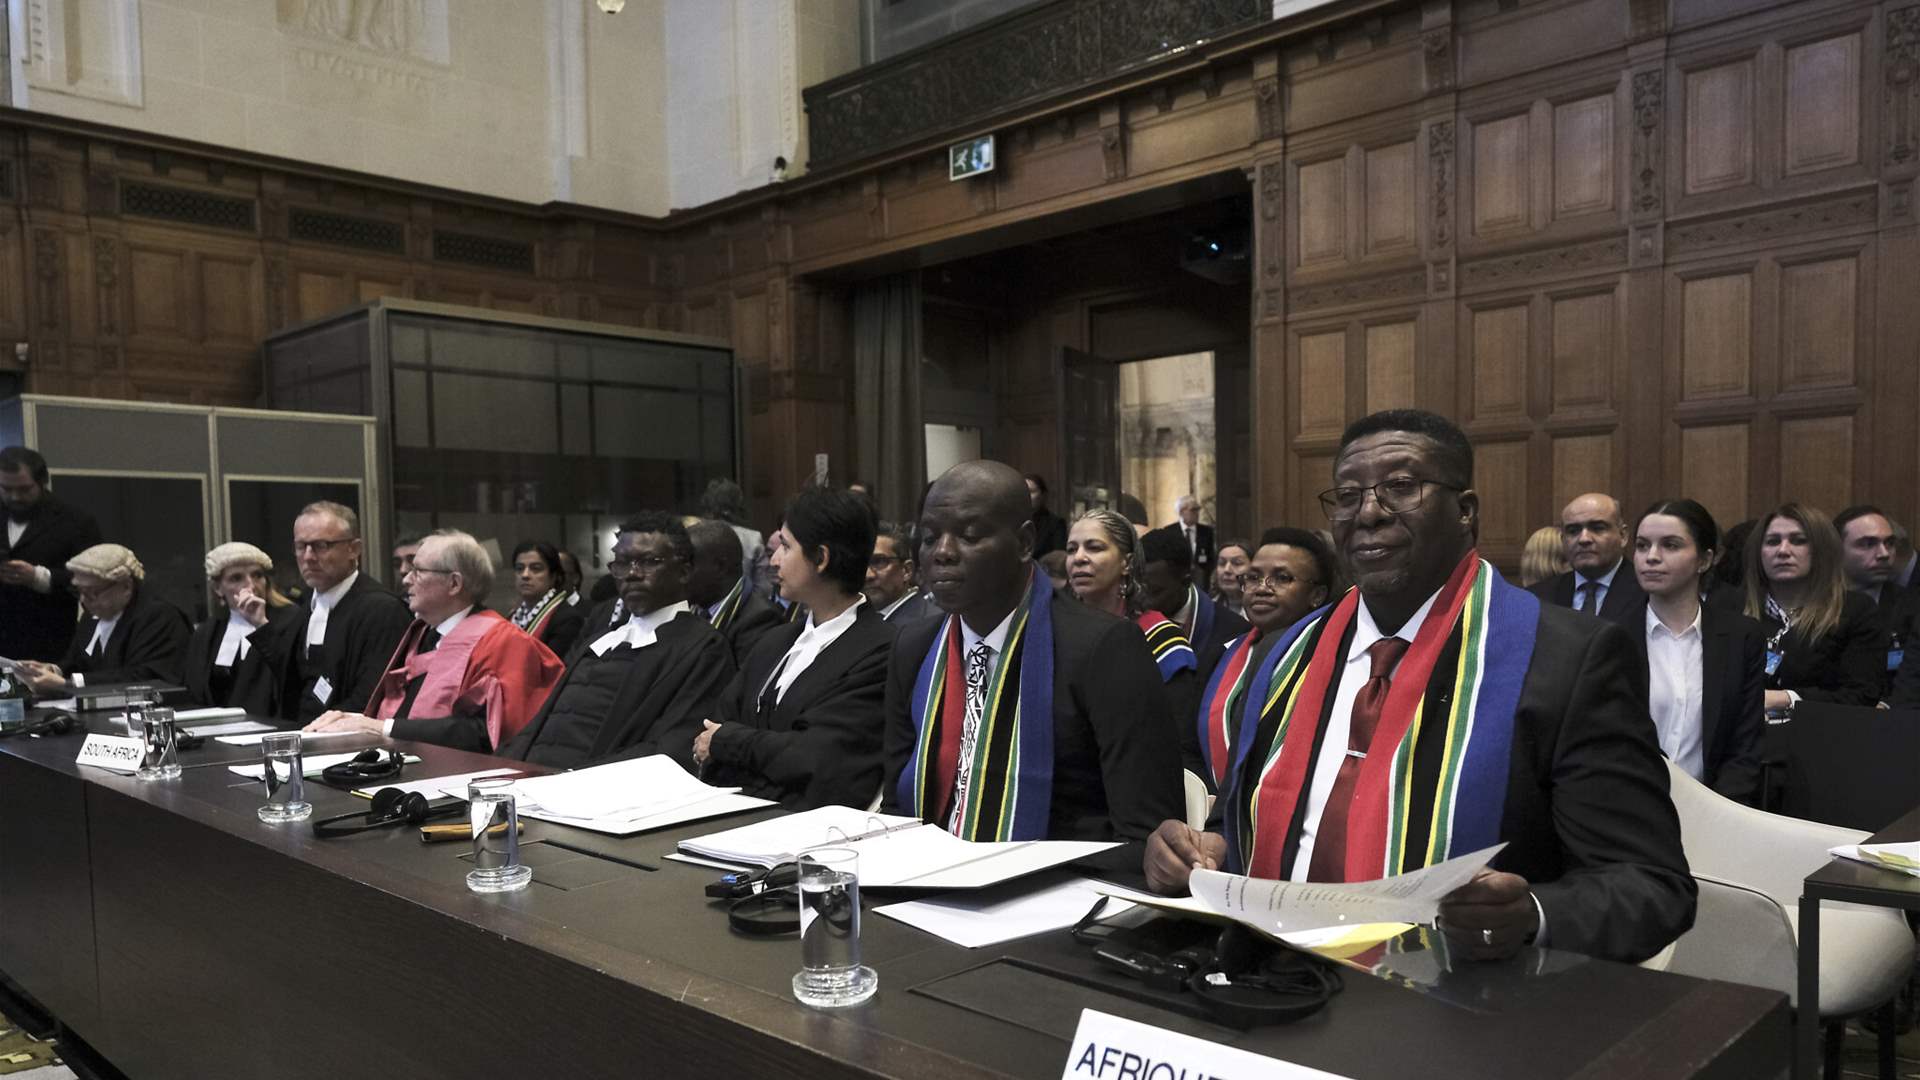 The Hague confrontation: South Africa accuses Israel of genocide at the International Court of Justice